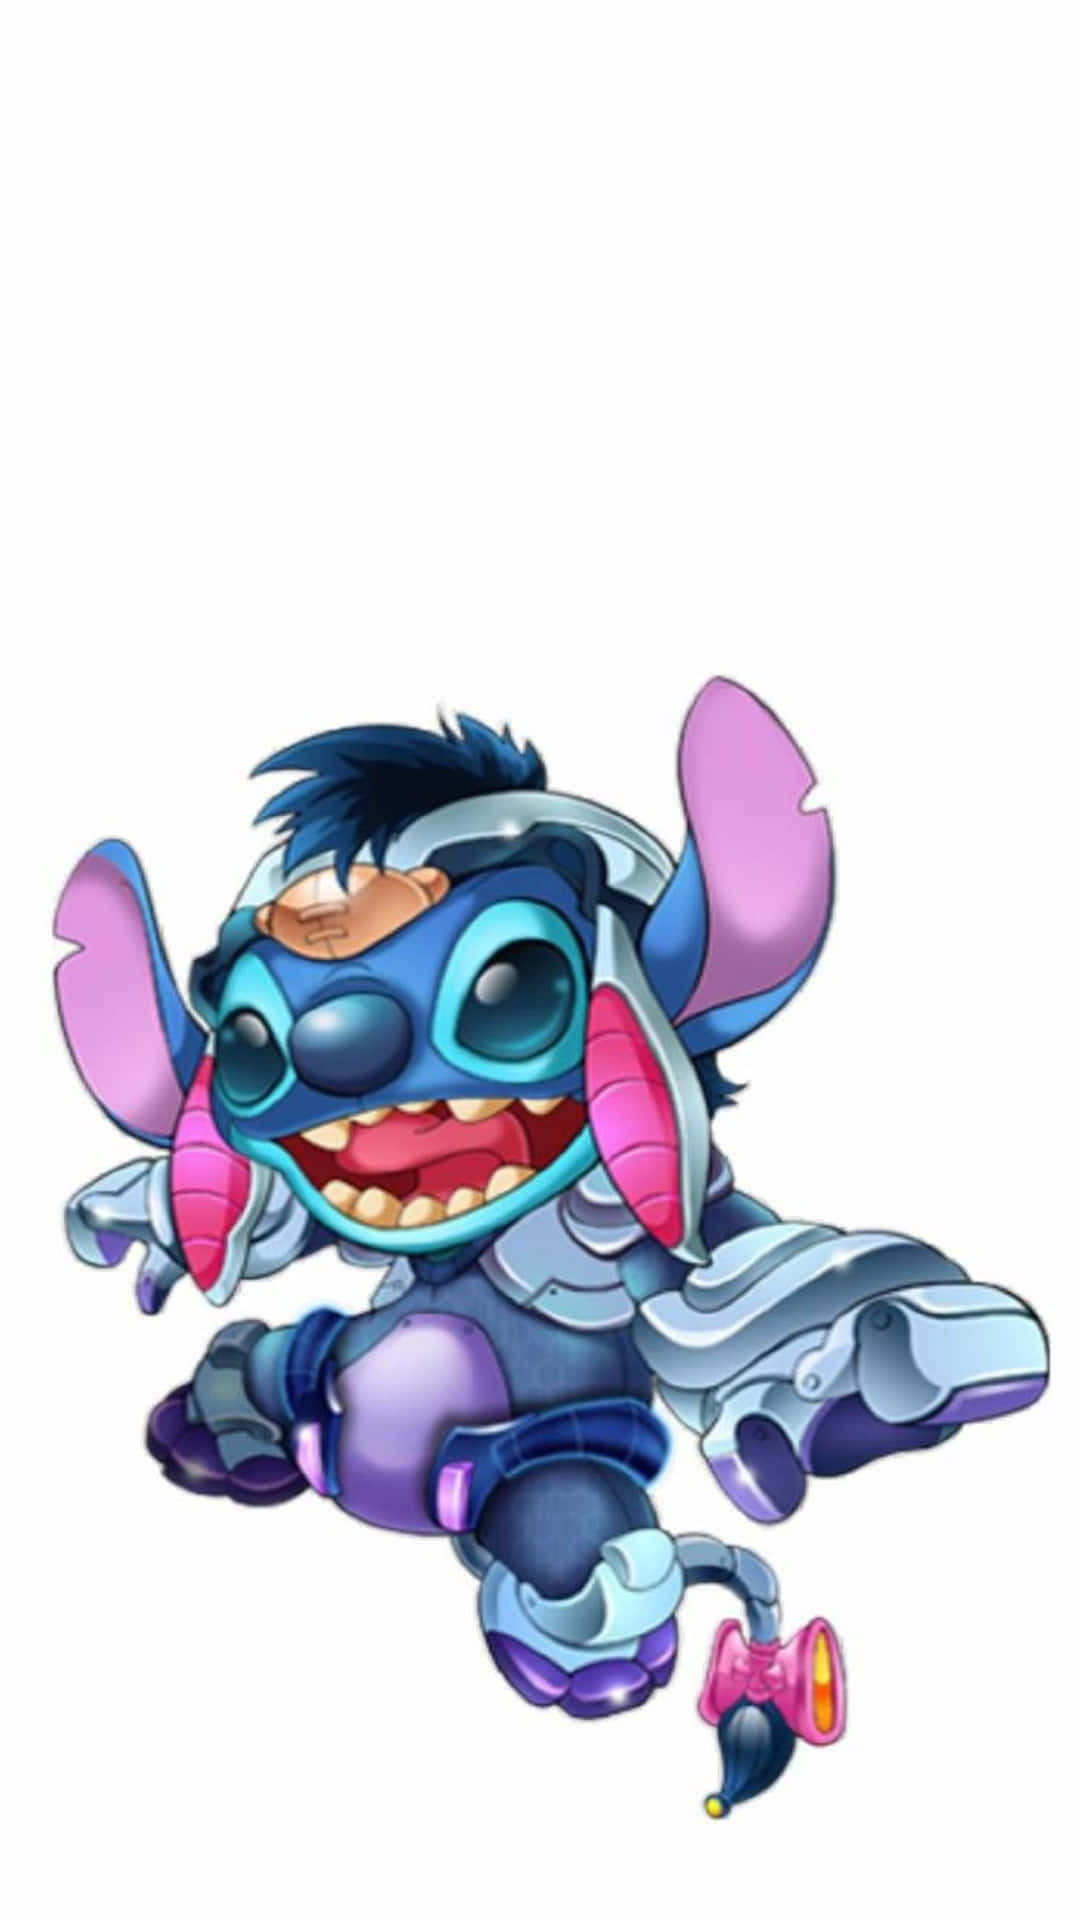 Laughing Stitch Cartoon Character Wallpaper